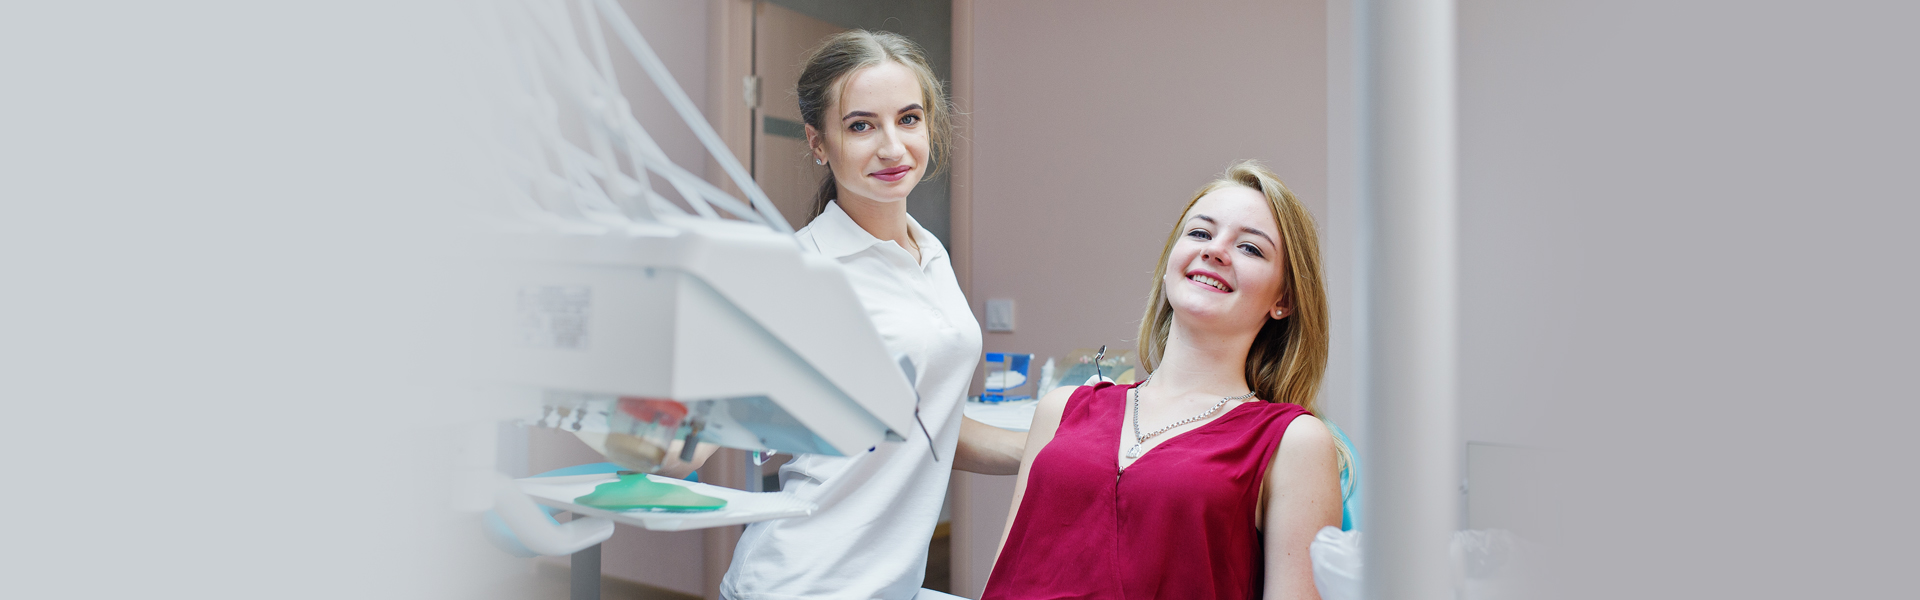 Is Sedation Dentistry Safe? Exploring the Risks and Precautions